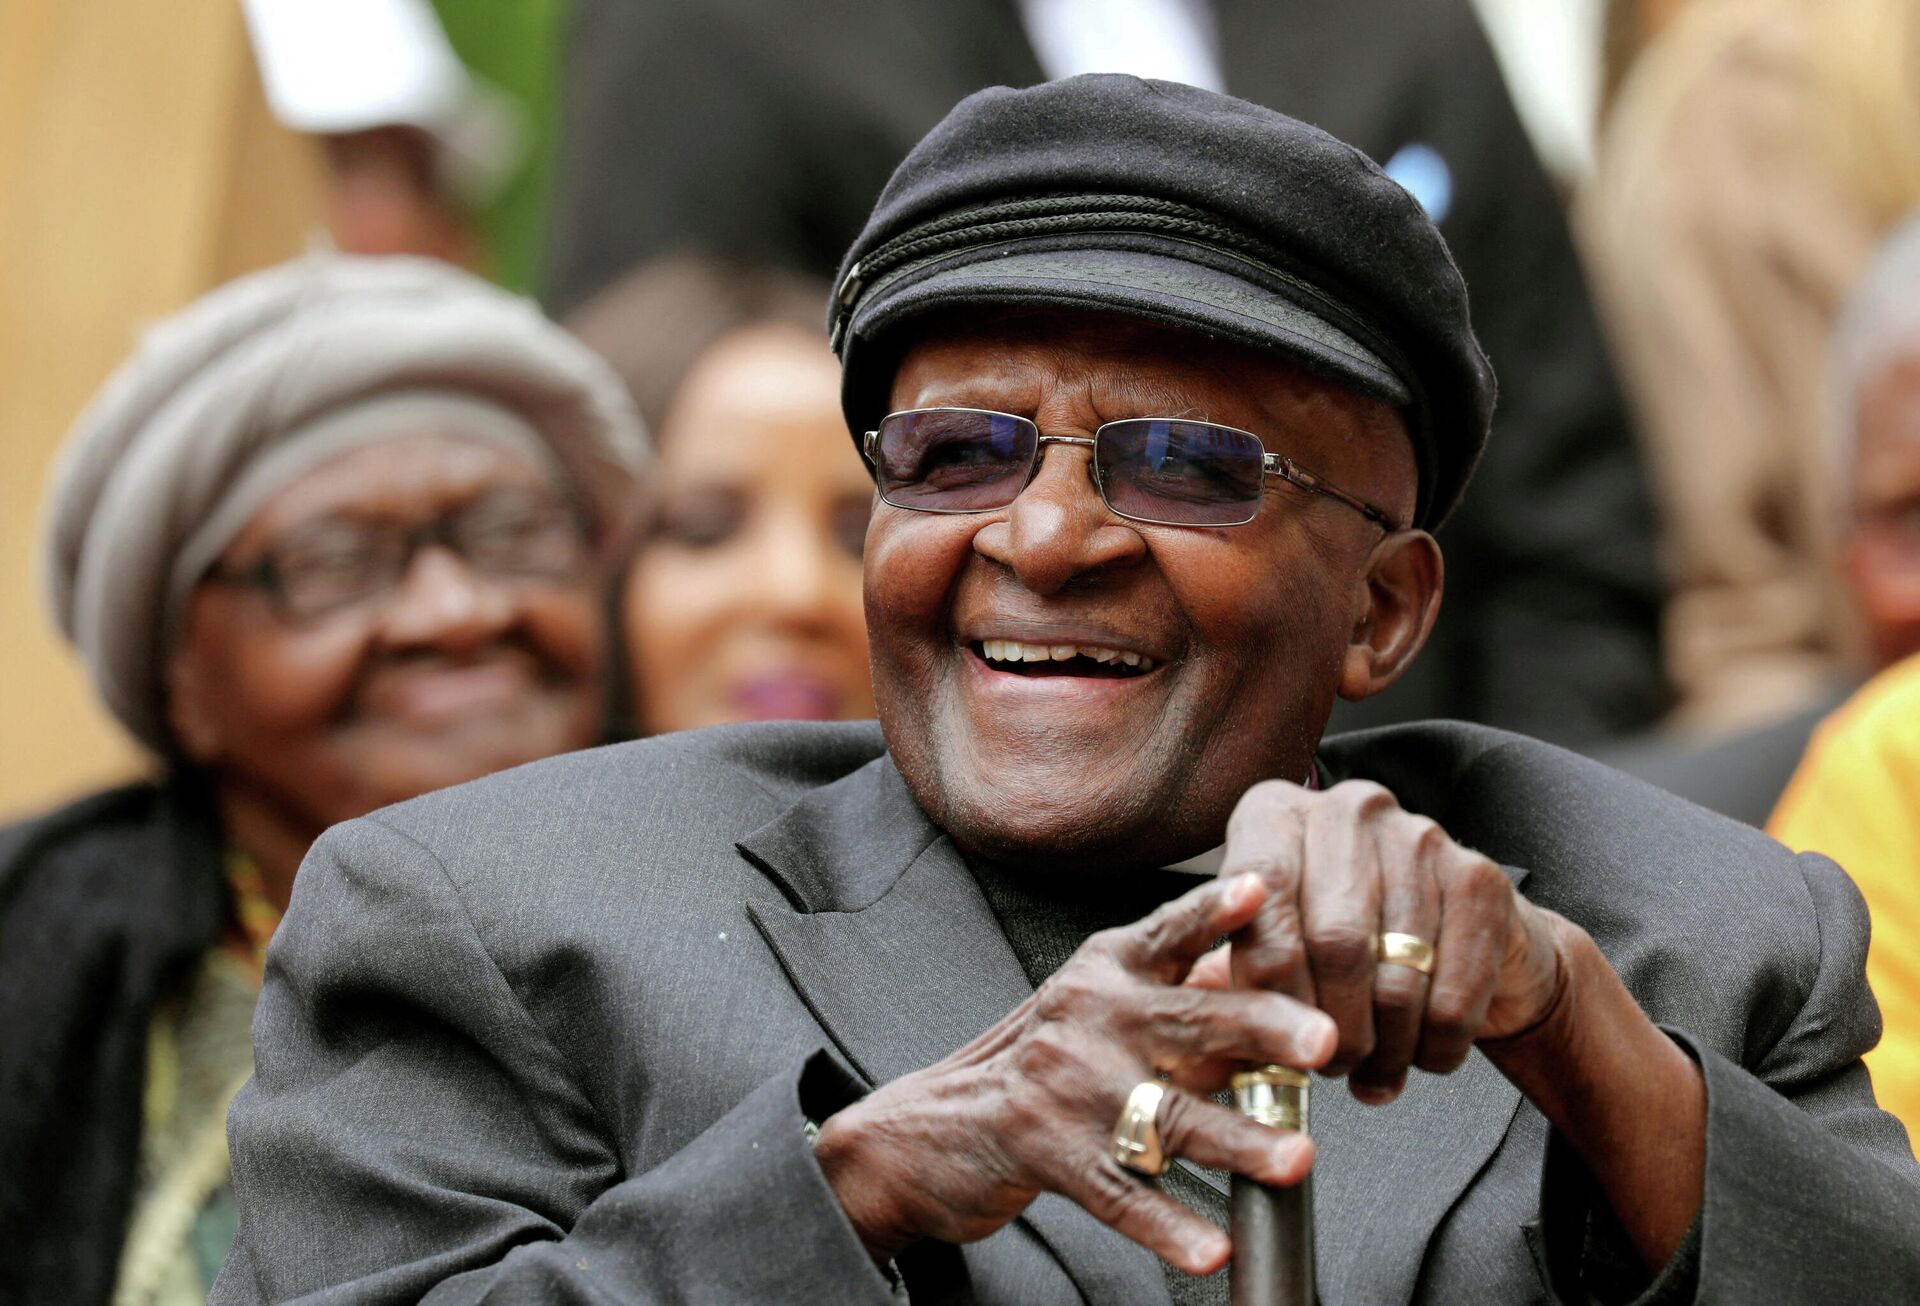 rchbishop Desmond Tutu laughs as crowds gather to celebrate his birthday by unveiling an arch in his honour outside St George's Cathedral in Cape Town, South Africa, October 7, 2017. - Sputnik International, 1920, 30.12.2021